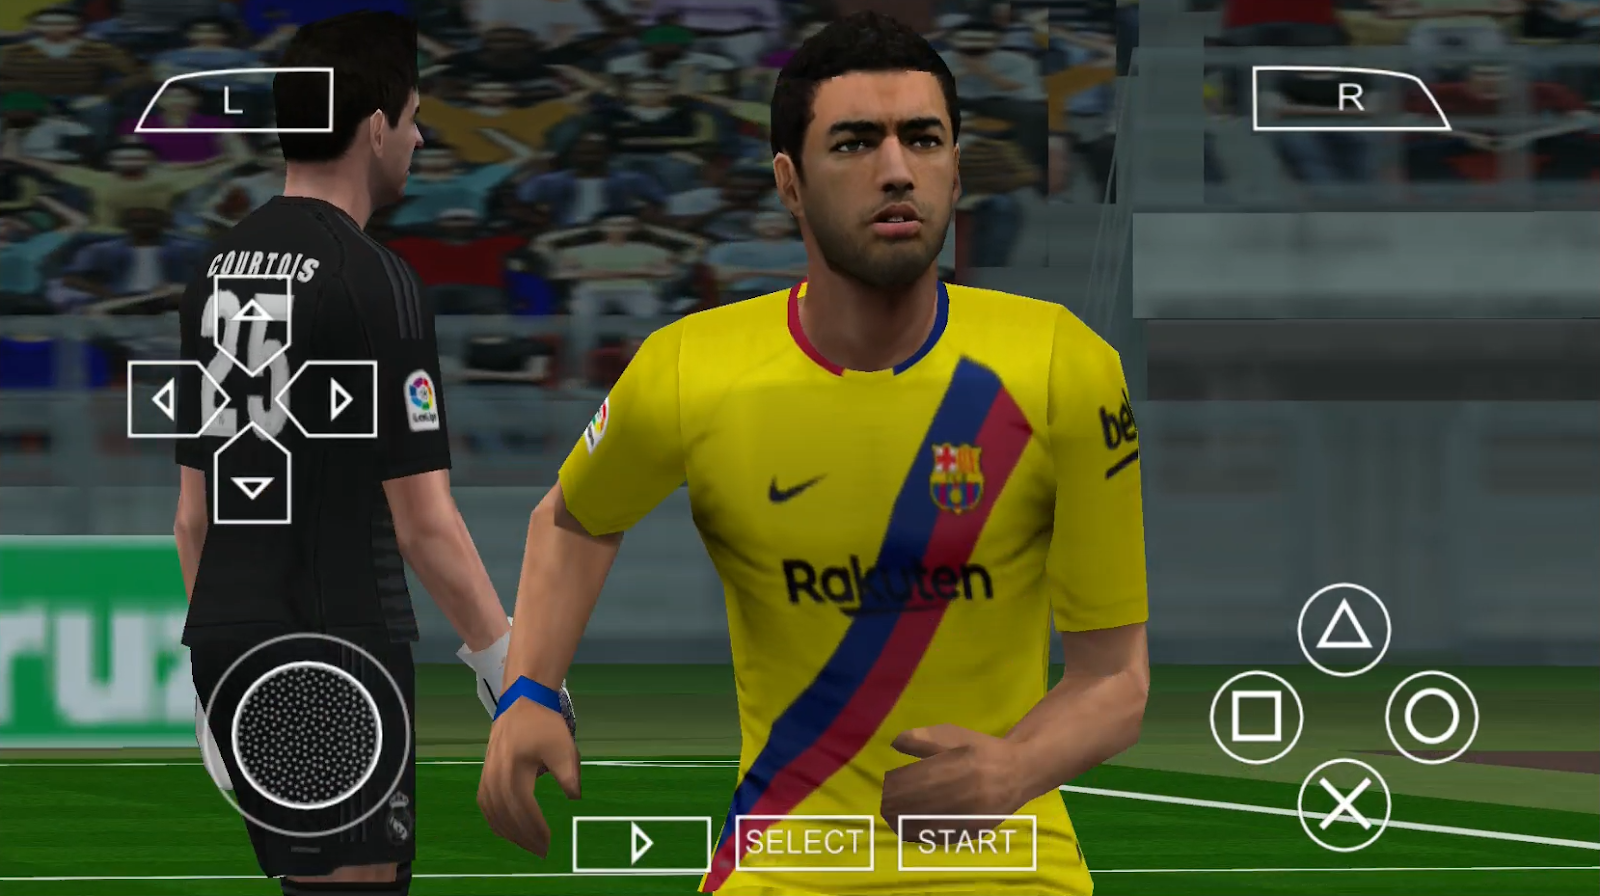 PES 2020 PPSSPP Camera PS4 Android Offline 700MB Best Graphics New Kits 2020 & Transfers Update